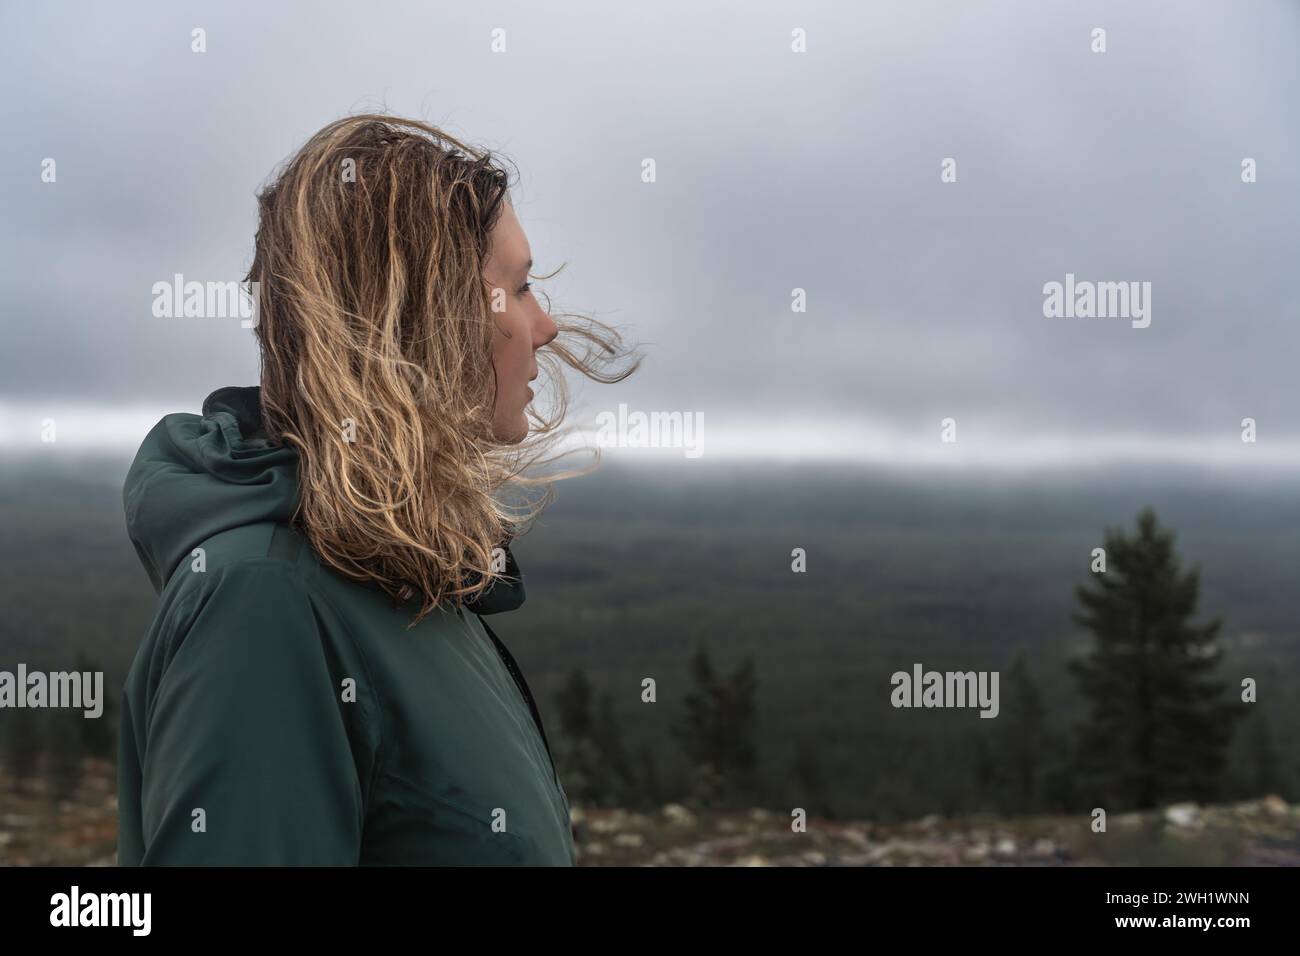 Side face view of woman with blond hair blowing in wind in nordic nature, in mind looking away over the forest and the stormy clouds in the background Stock Photo